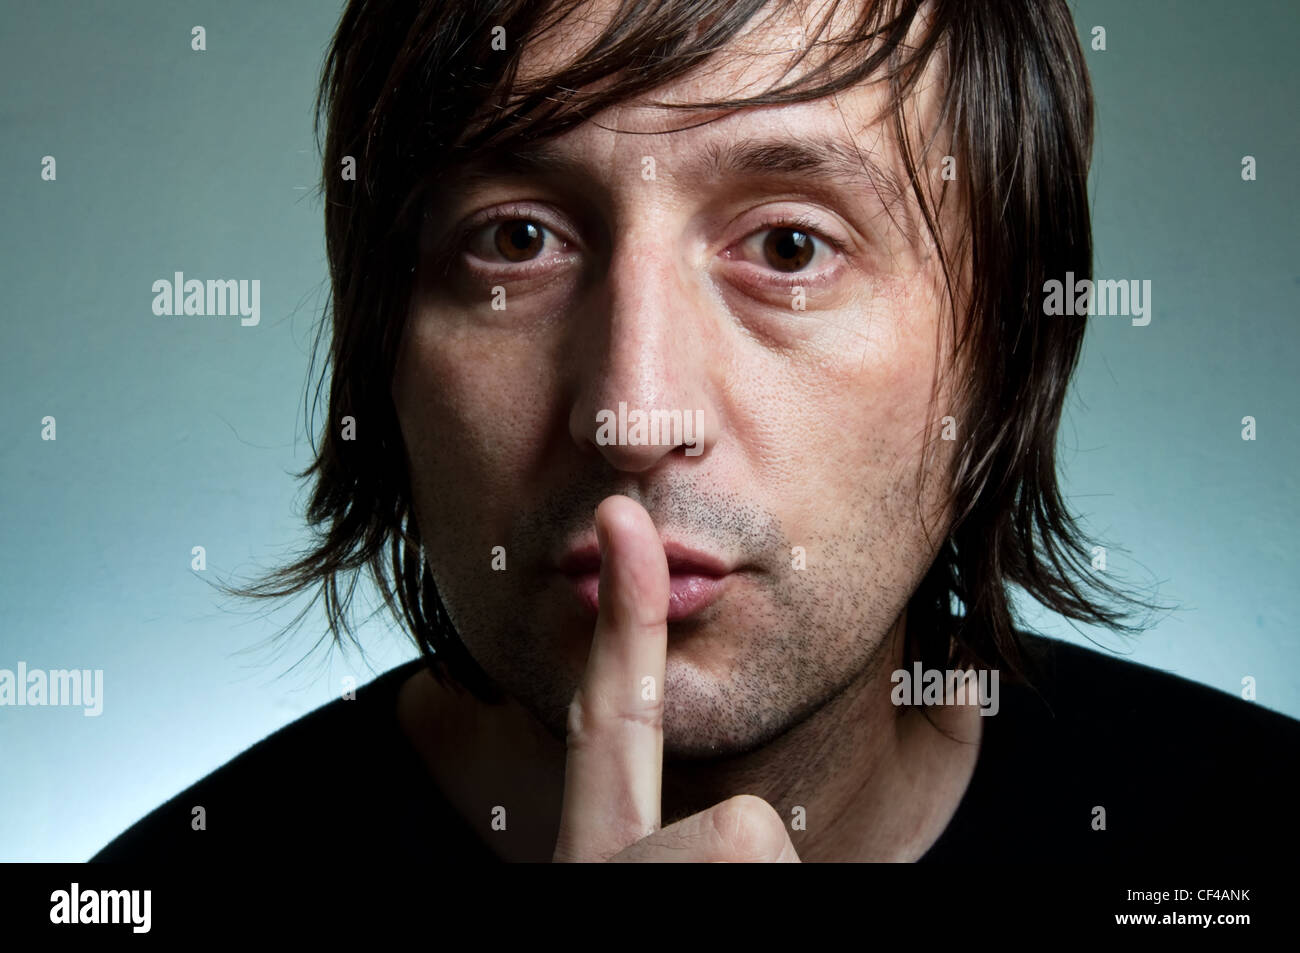 MAn holding a finger over his mouth making silent gesture. Stock Photo